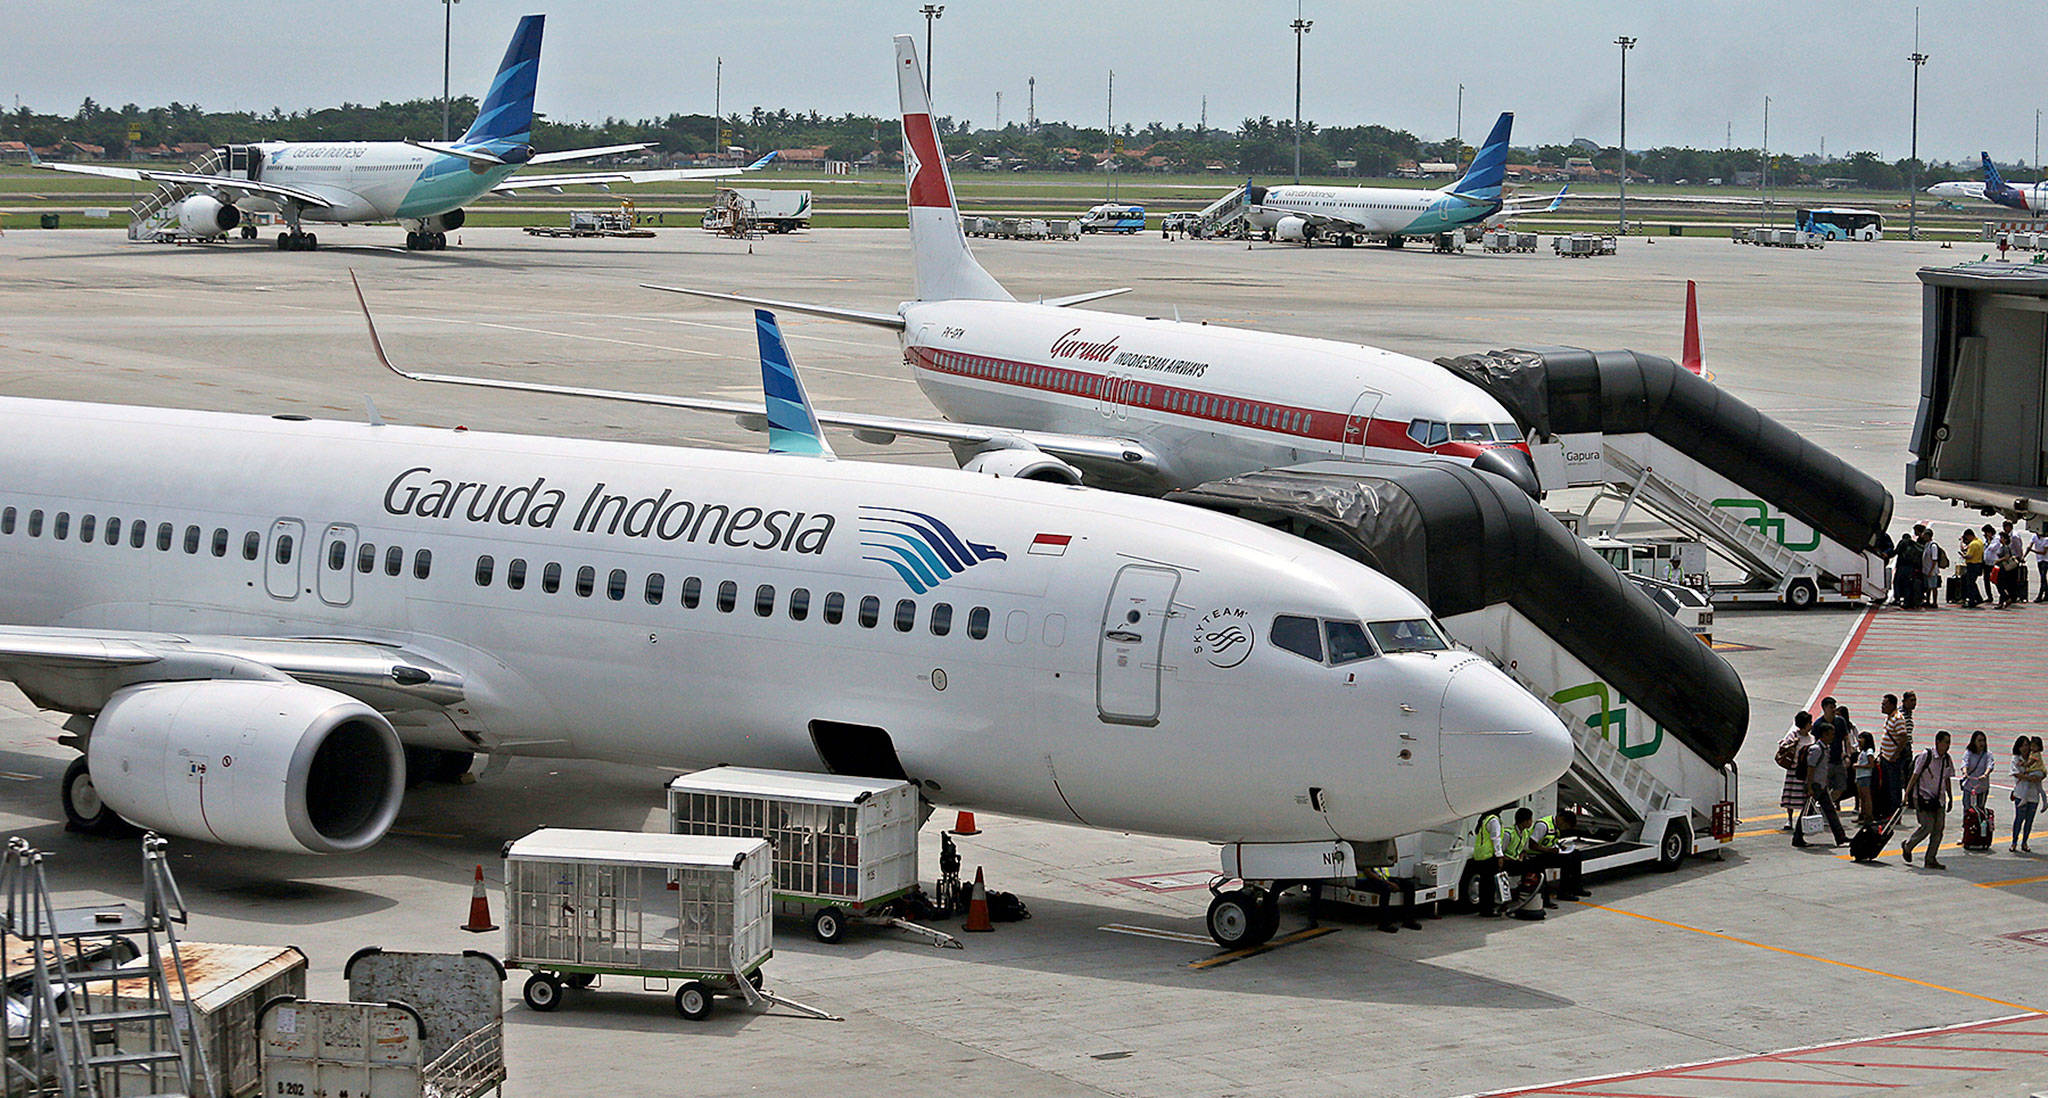 A Garuda Indonesia airlines Boeing 737-800 at the Soekarno-Hatta International Airport in Tangerang, Indonesia, in 2017. Indonesia’s flag carrier is seeking to cancel a multibillion-dollar order for 49 Boeing 737 MAX 8 jets, citing a loss of confidence in the model following two crashes. (AP Photo/Dita Alangkara, File)